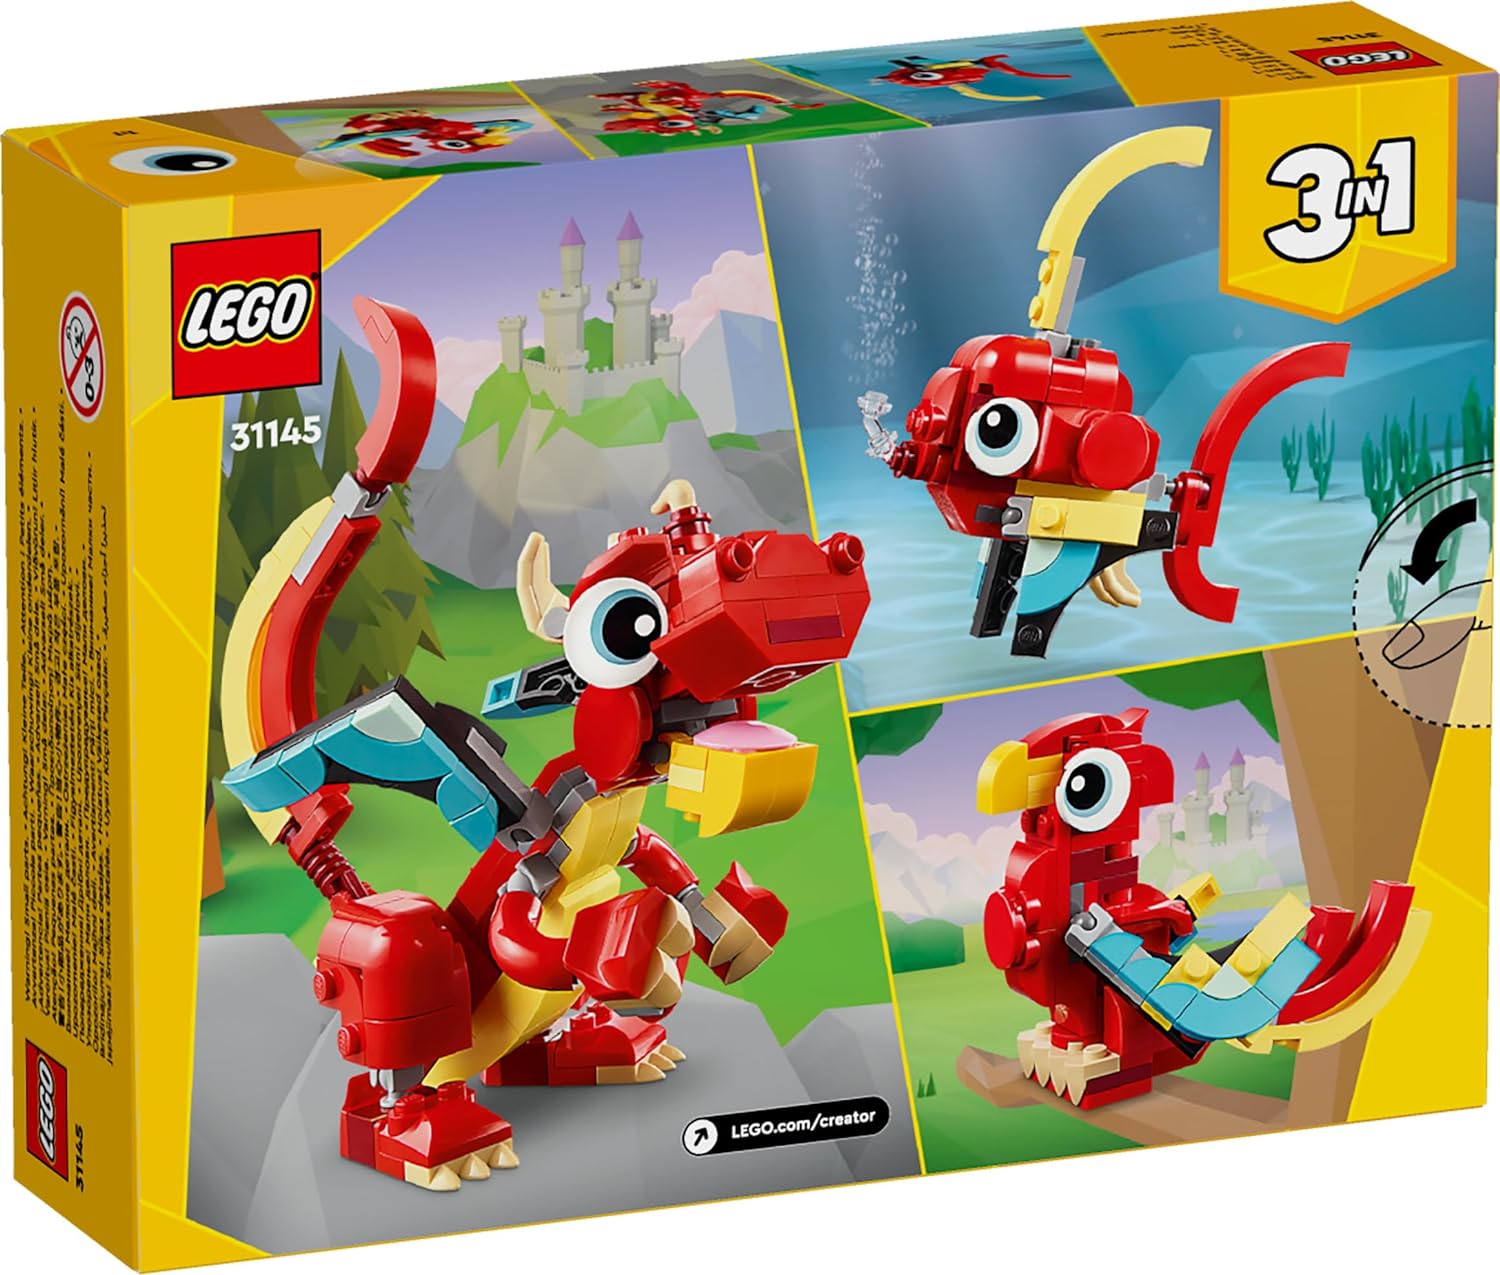 LEGO Creator 3In1 Red Dragon Toy Set Building Kit for Ages 6+